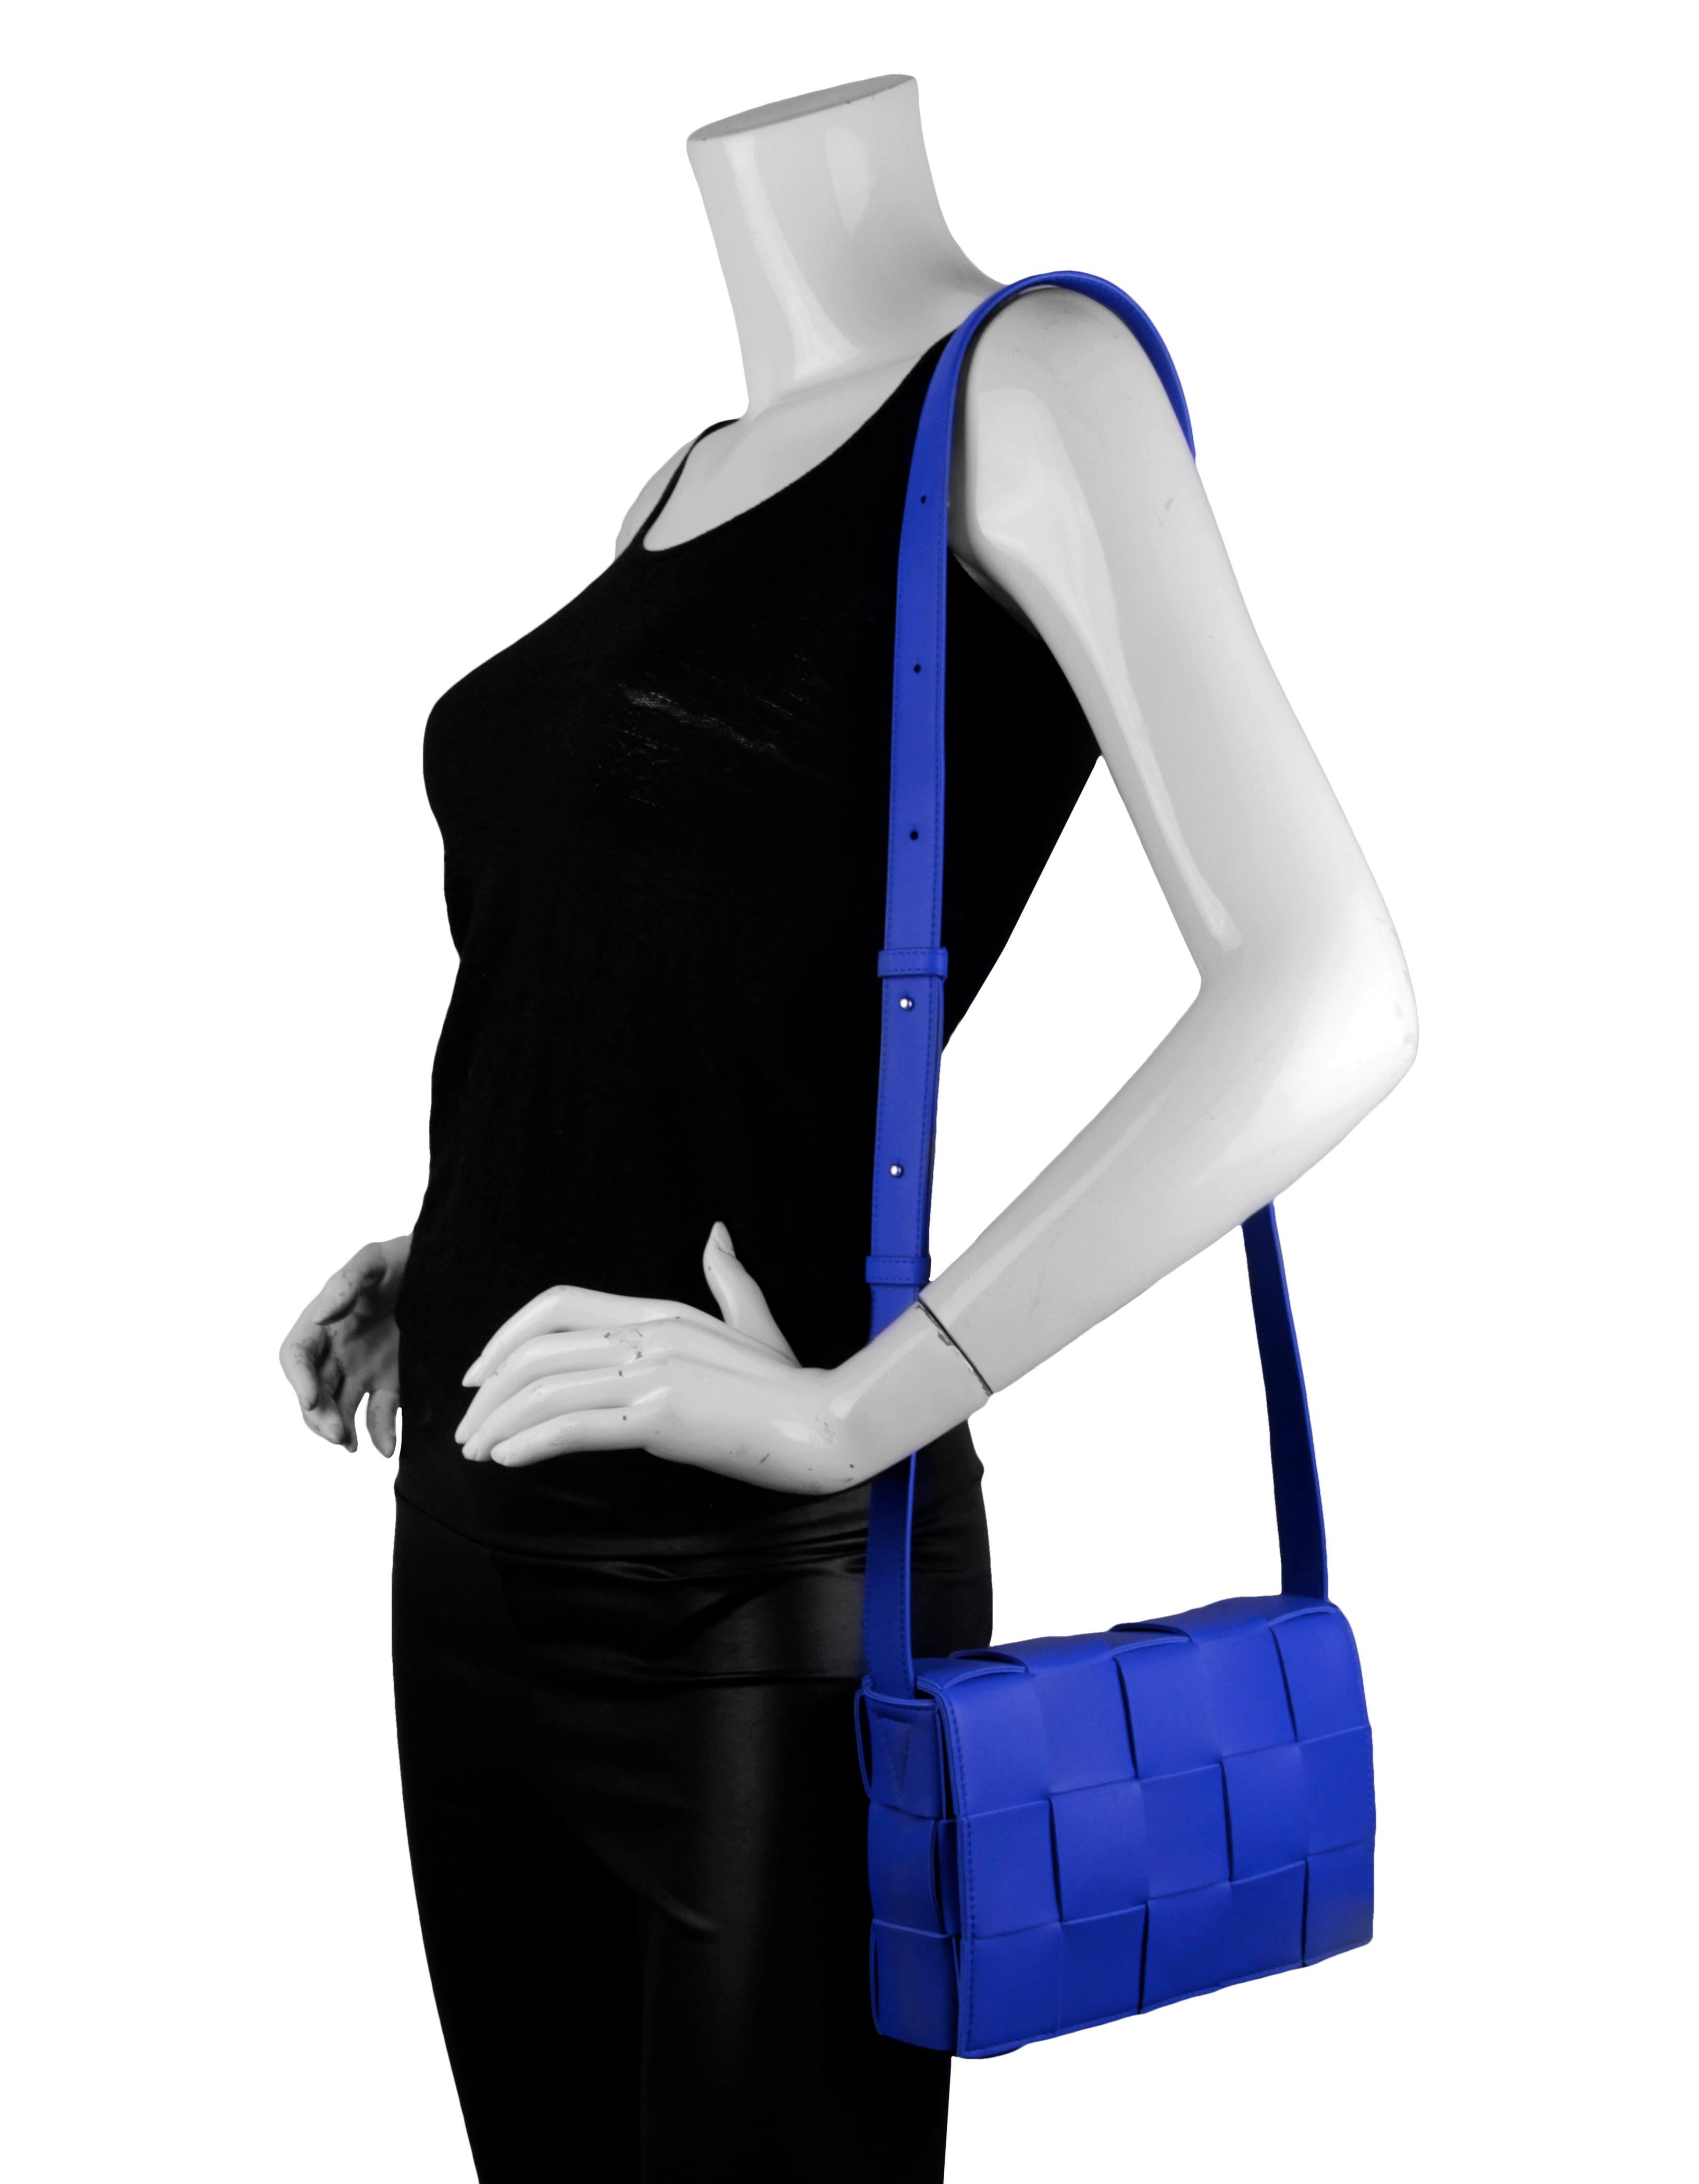 Bottega Veneta Cobalt Blue Lambskin Leather Maxi Intrecciato Cassette Crossbody Bag

Made In: Italy
Color: Cobalt blue
Hardware: Silvertone
Materials: Lambskin leather and metal
Lining: Bonded lambskin leather
Closure/Opening: Flap top with